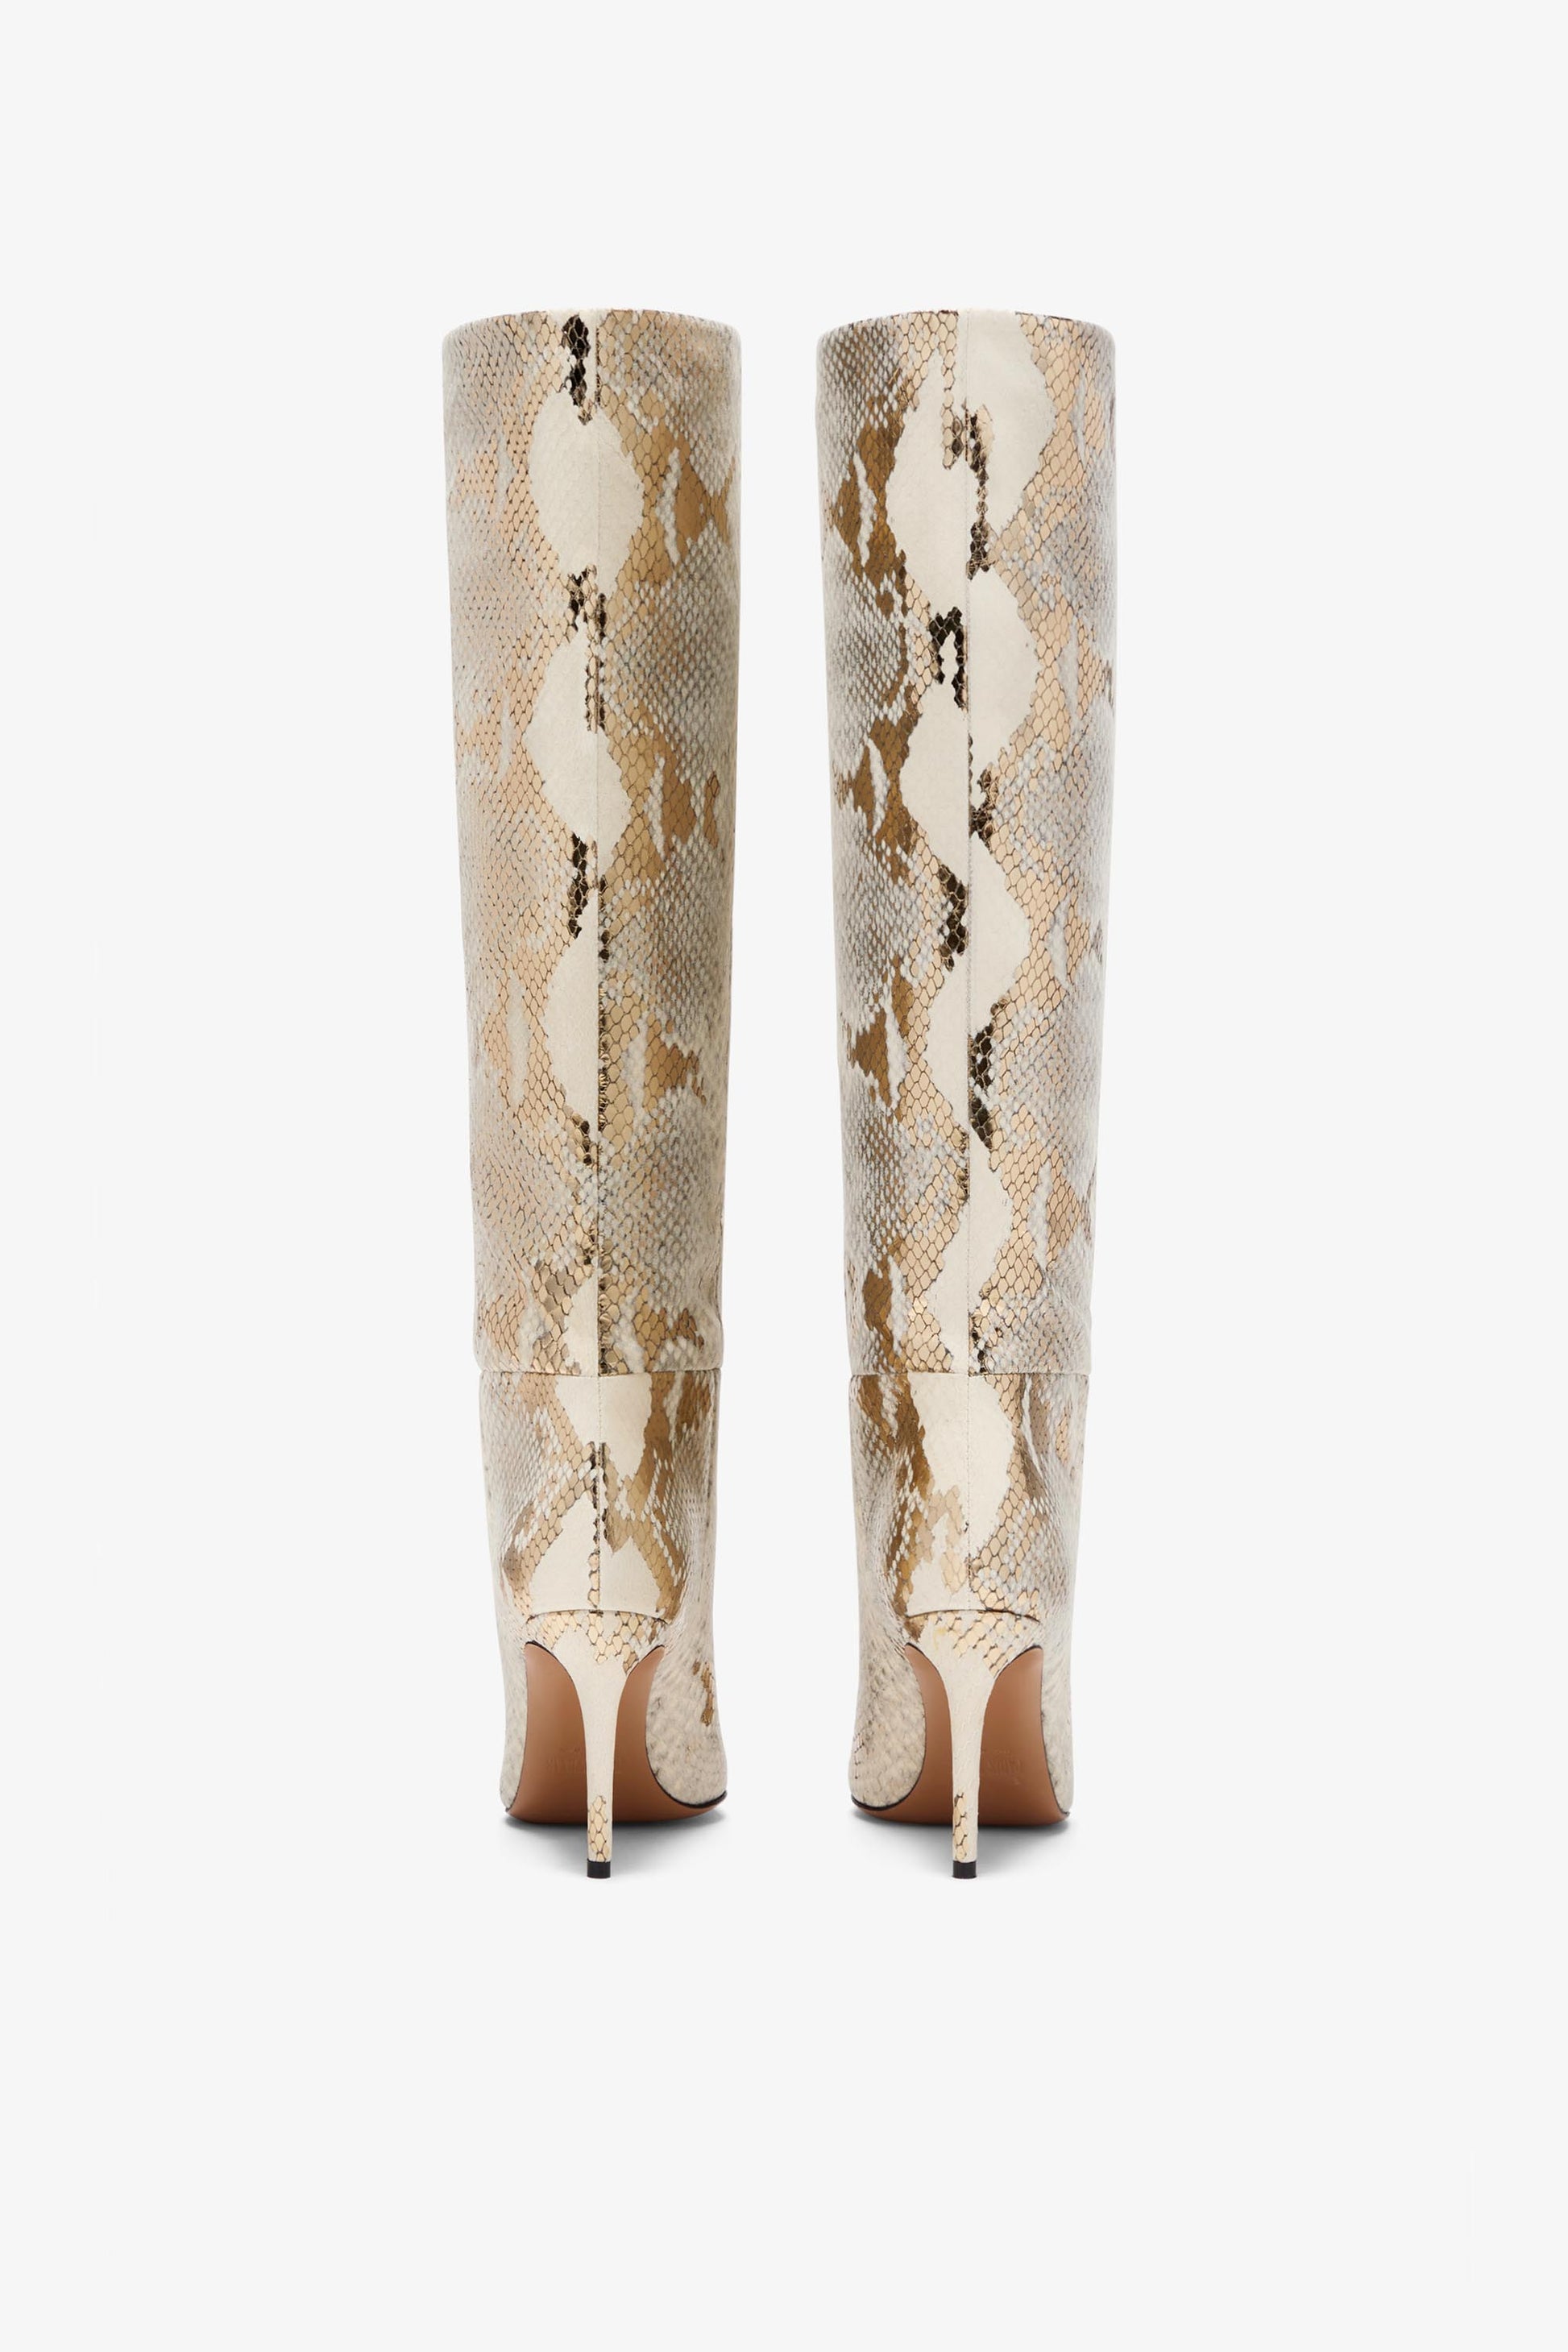 Rock python-effect leather boot